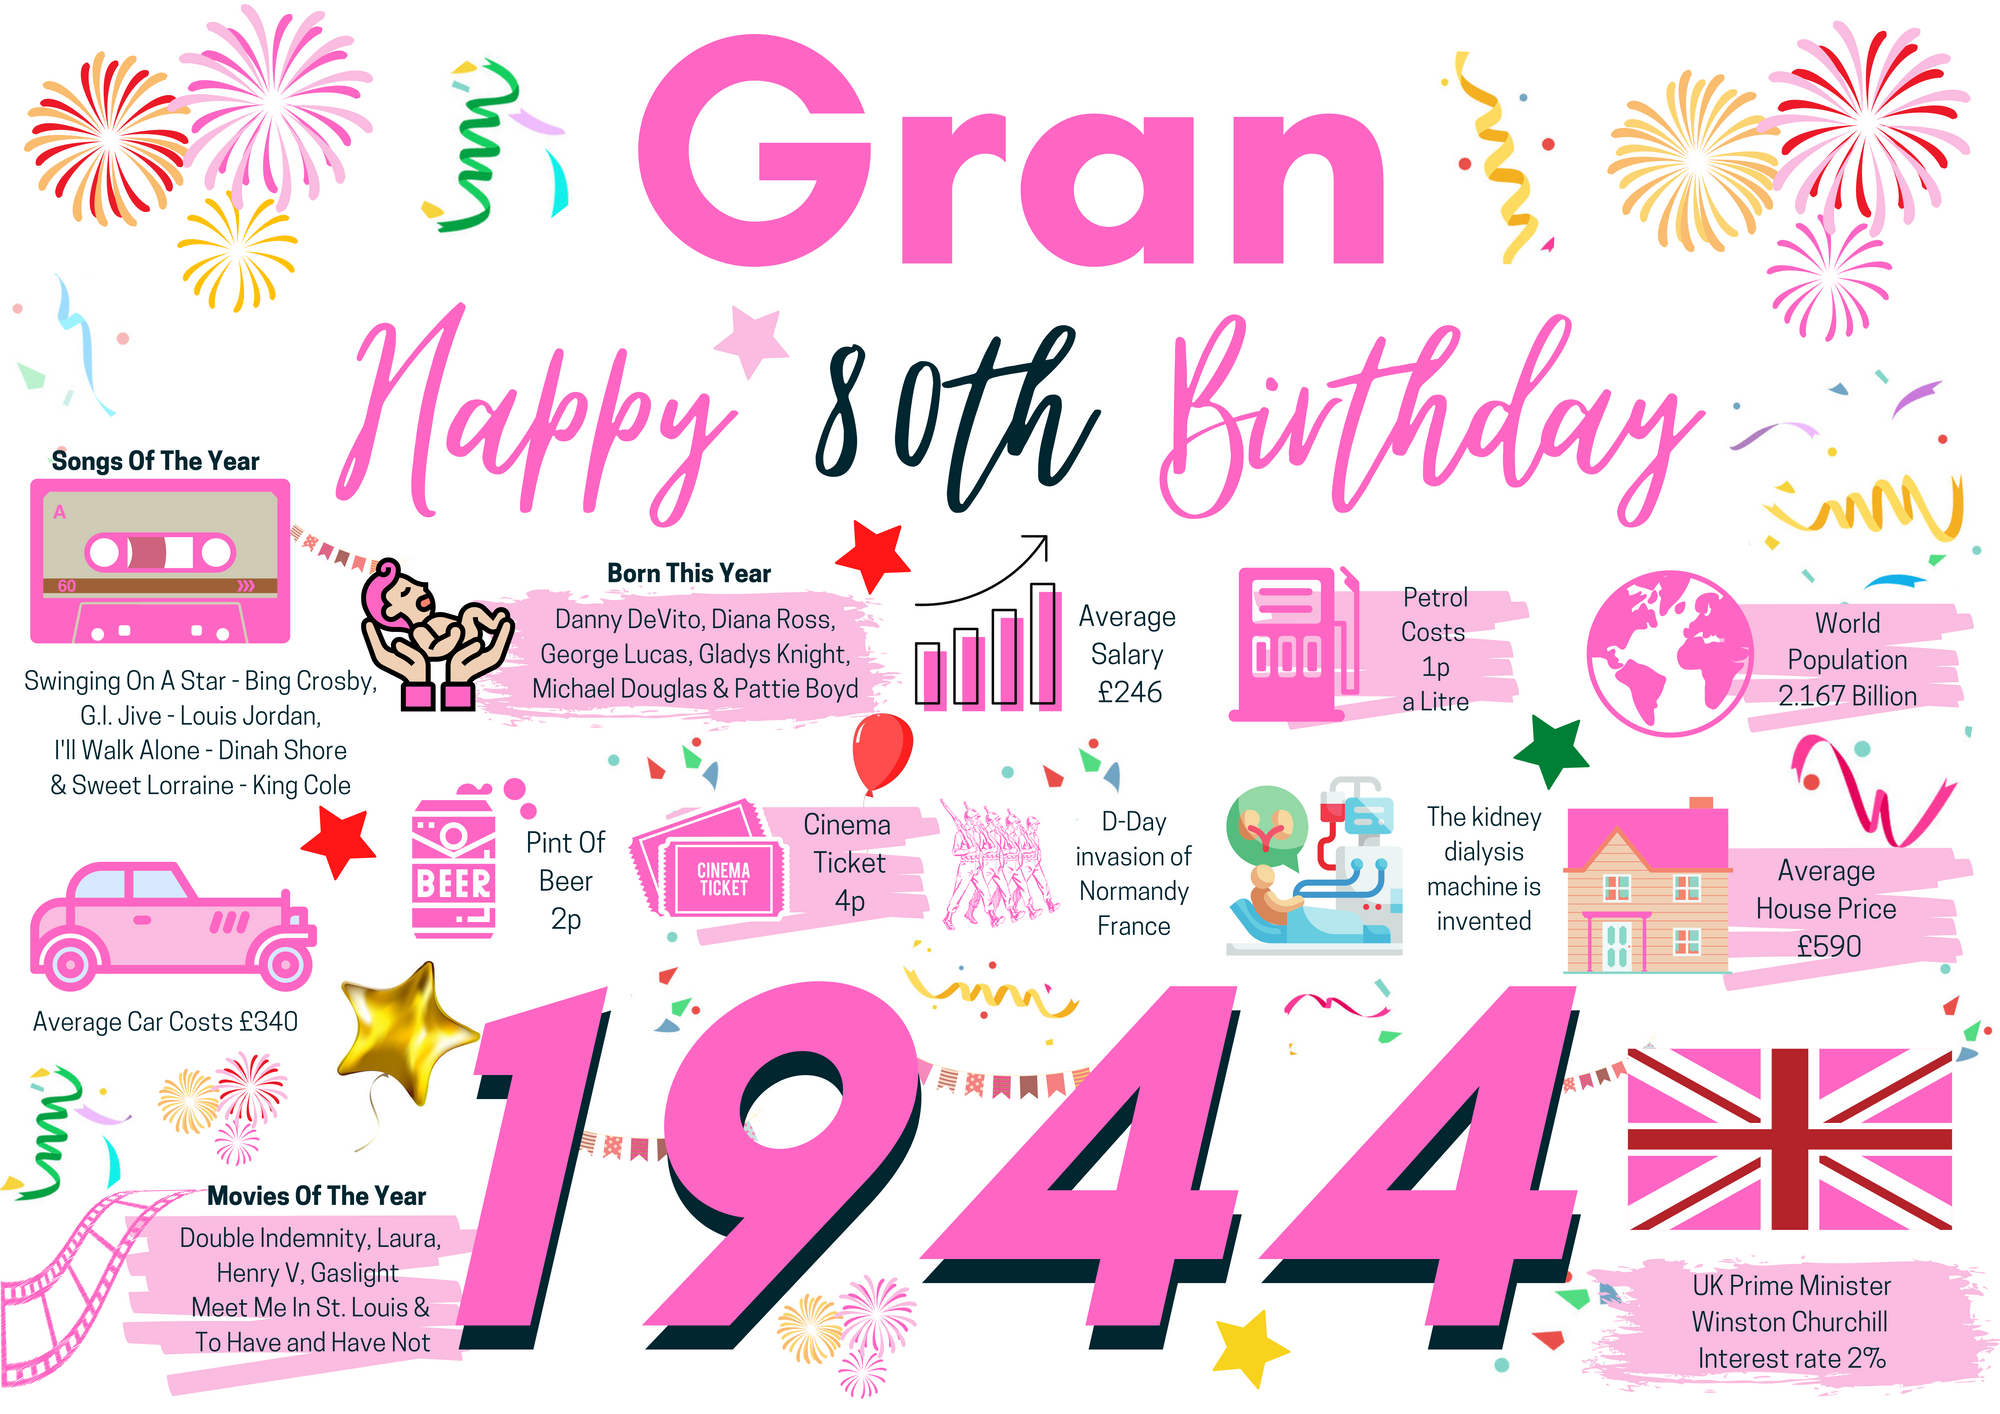 80th Birthday Card For Grandmother, Born In 1944 Facts Milestone